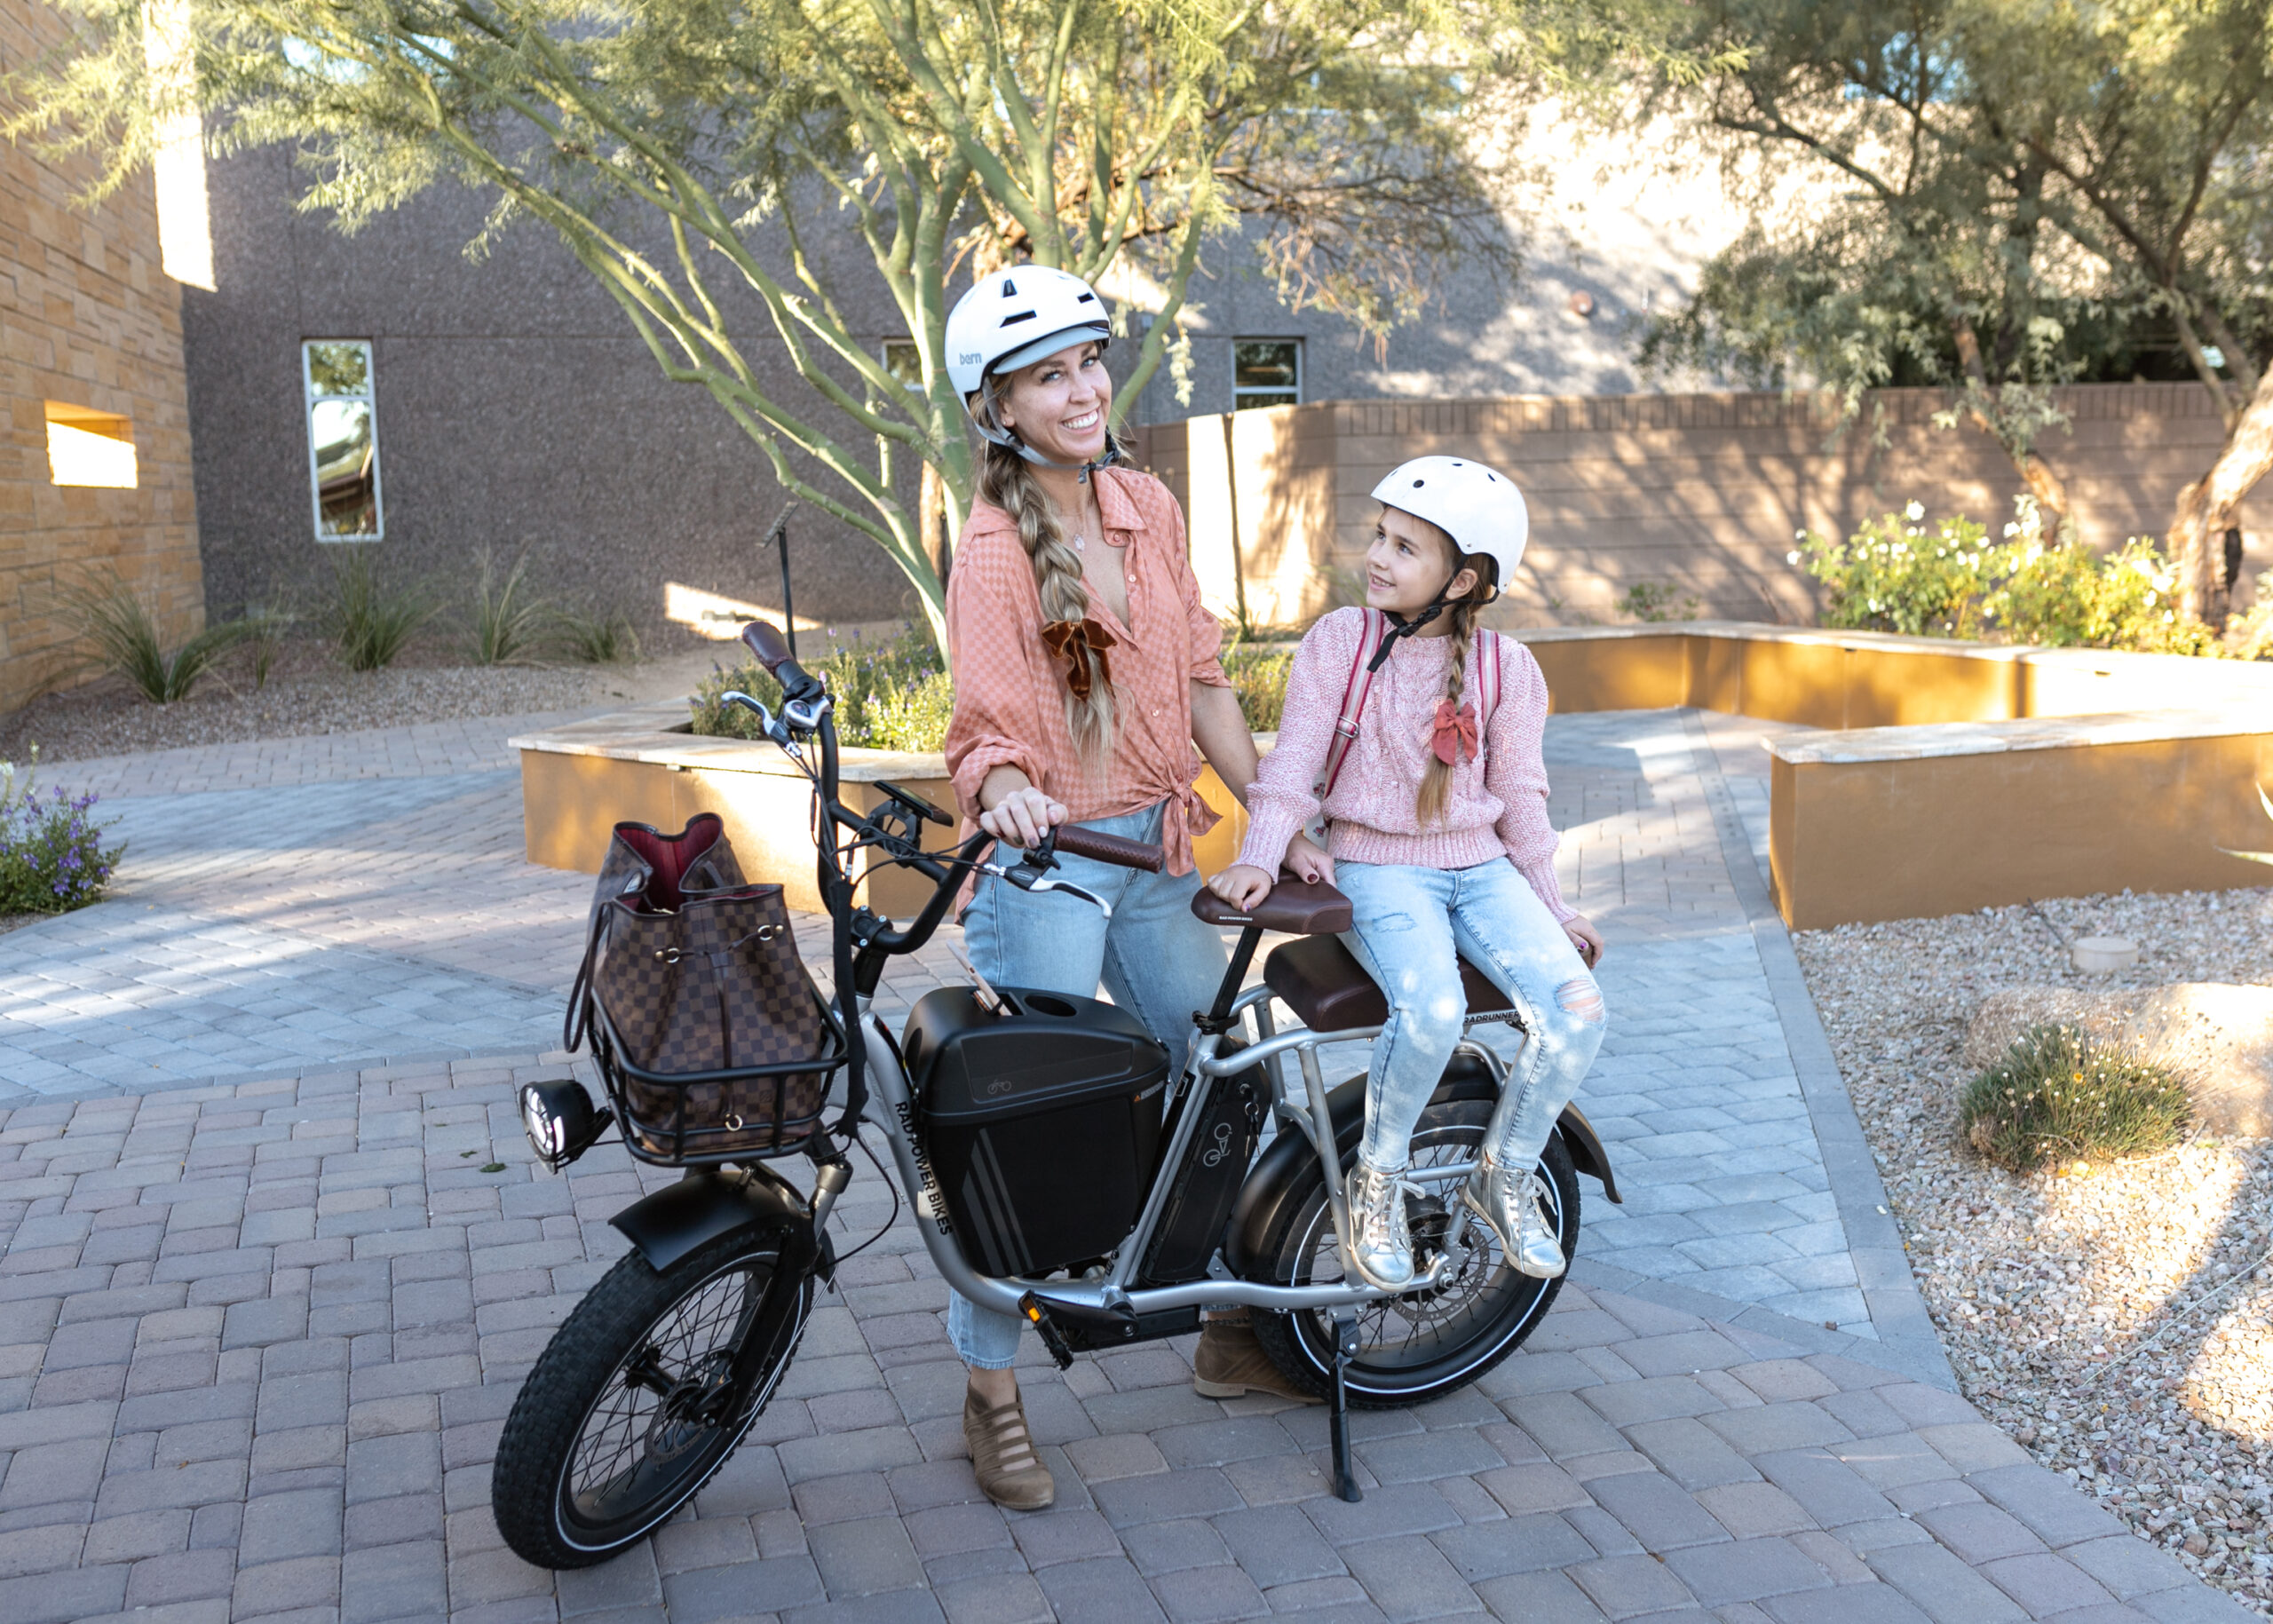 we love getting to and from after school activities on our rad power bike, with built-in space for a passenger! #radpowerbikes #ebikes #commuterbike #momlife